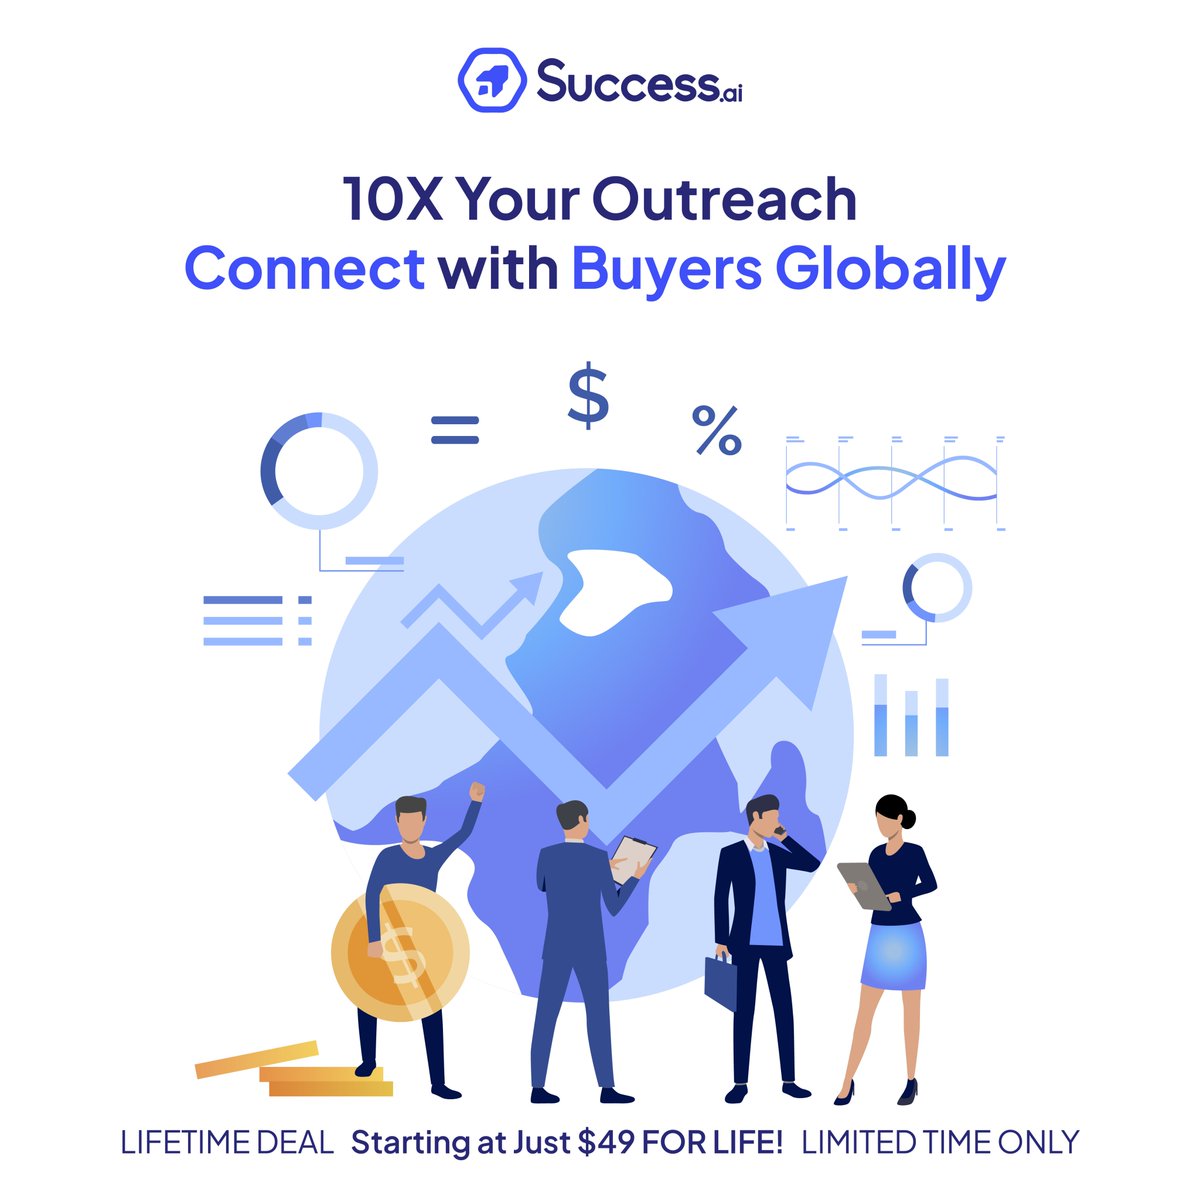 Maximize outreach with Success.ai!   Connect globally without breaking the bank. LIFETIME DEAL at $49 – act now! appsumo.com/products/succe… 

#SuccessAI #BoundlessOutreach #GlobalBuyers #CostEffectiveCampaigns #PersonalizedEngagement #MarketingMastery #ReachTheWorld